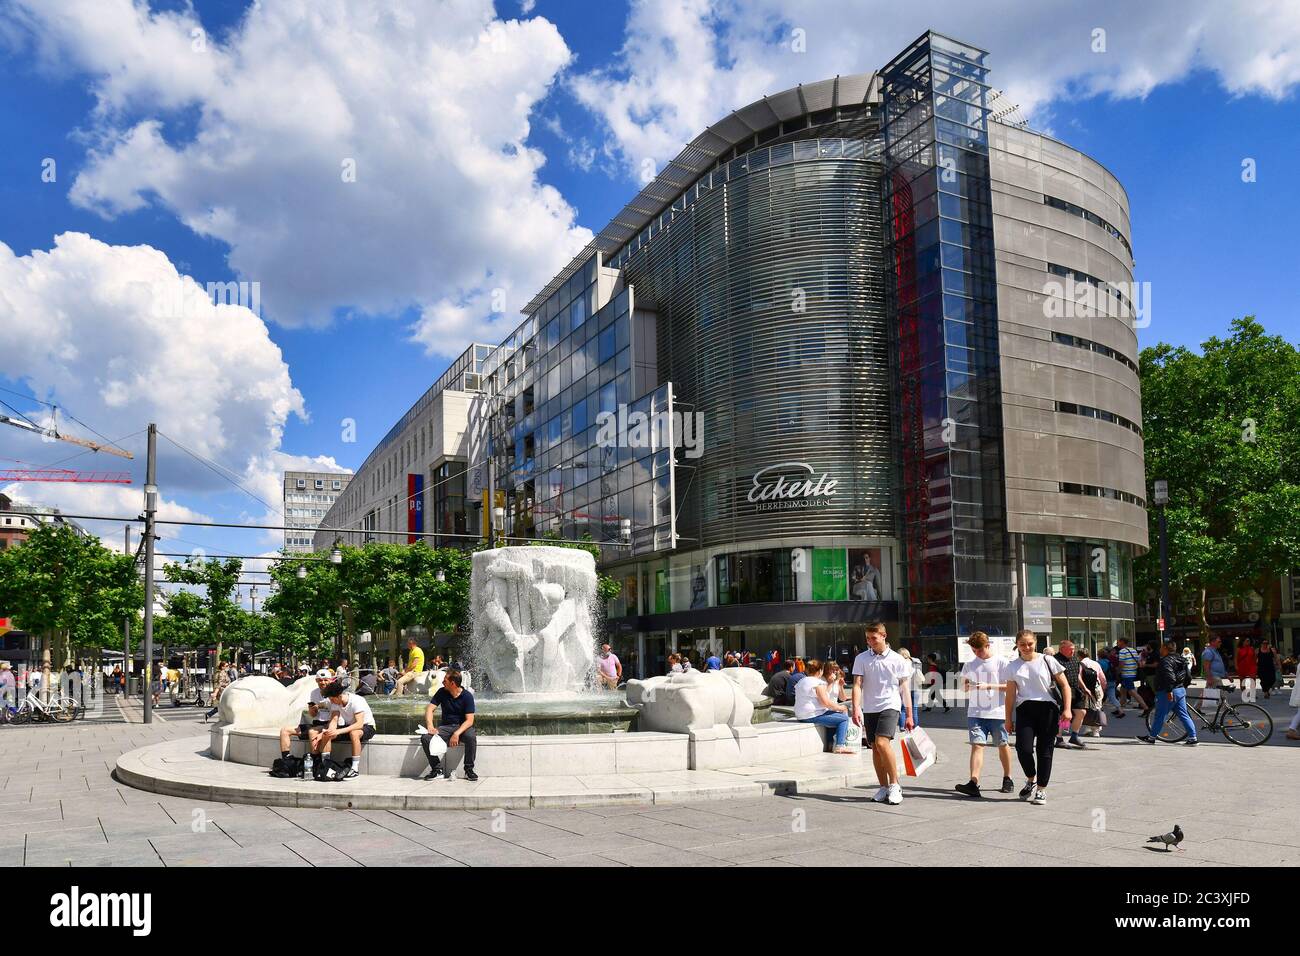 Frankfurt am Main, Germany - June 2020: Shopping street called 'Zeil' with 'Brockhaus' Fountain on a sunny day full of people in modern Frankfurt city Stock Photo